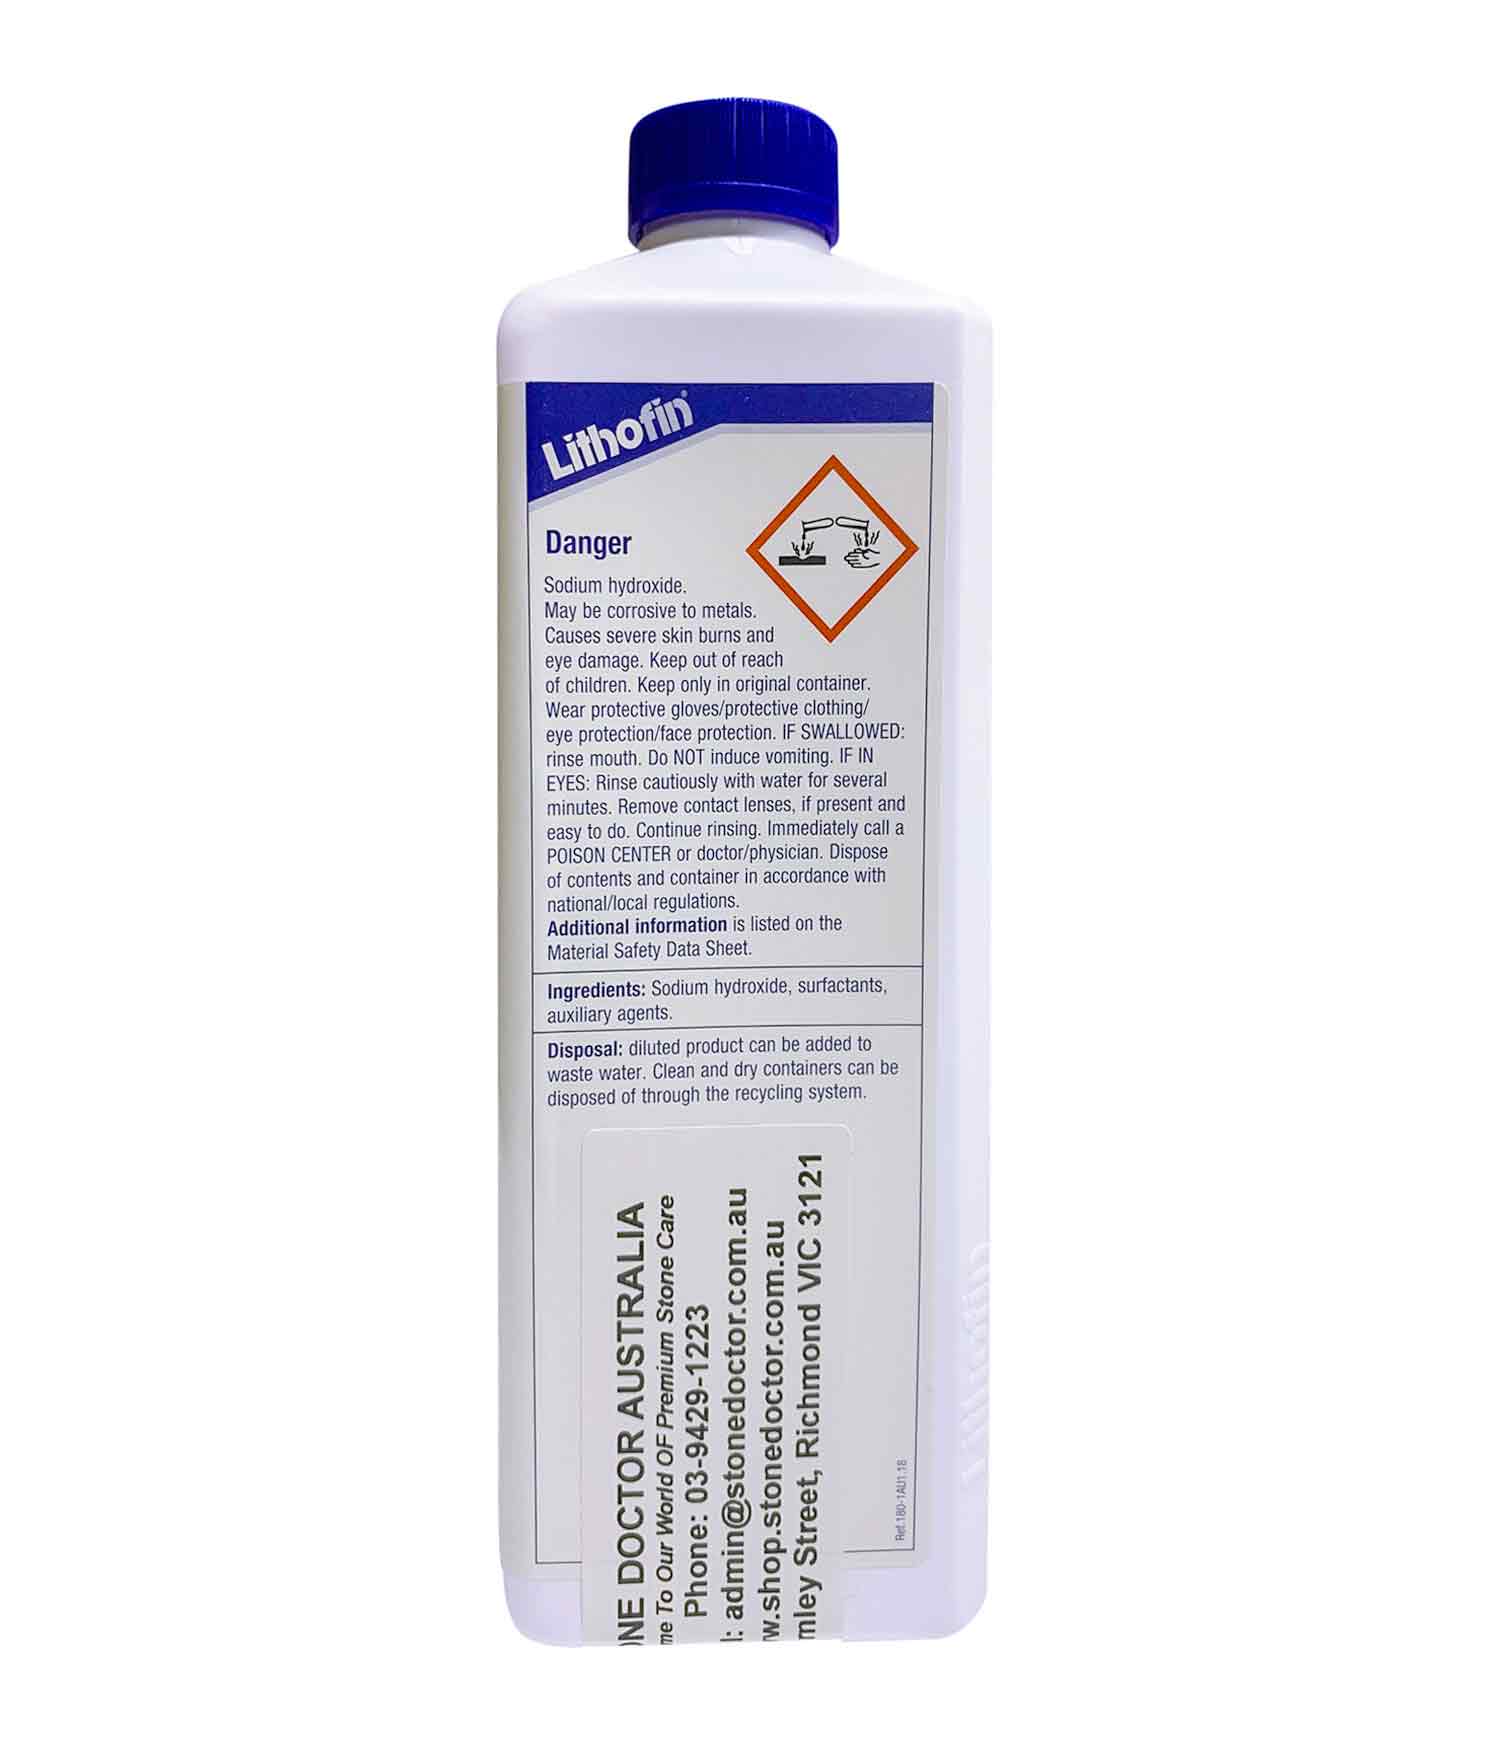 Lithofin KF Intensive Cleaner - Stone Doctor Australia - Porcelain & Ceramic Tiles > Alkaline Product > Deep Periodic Cleaning